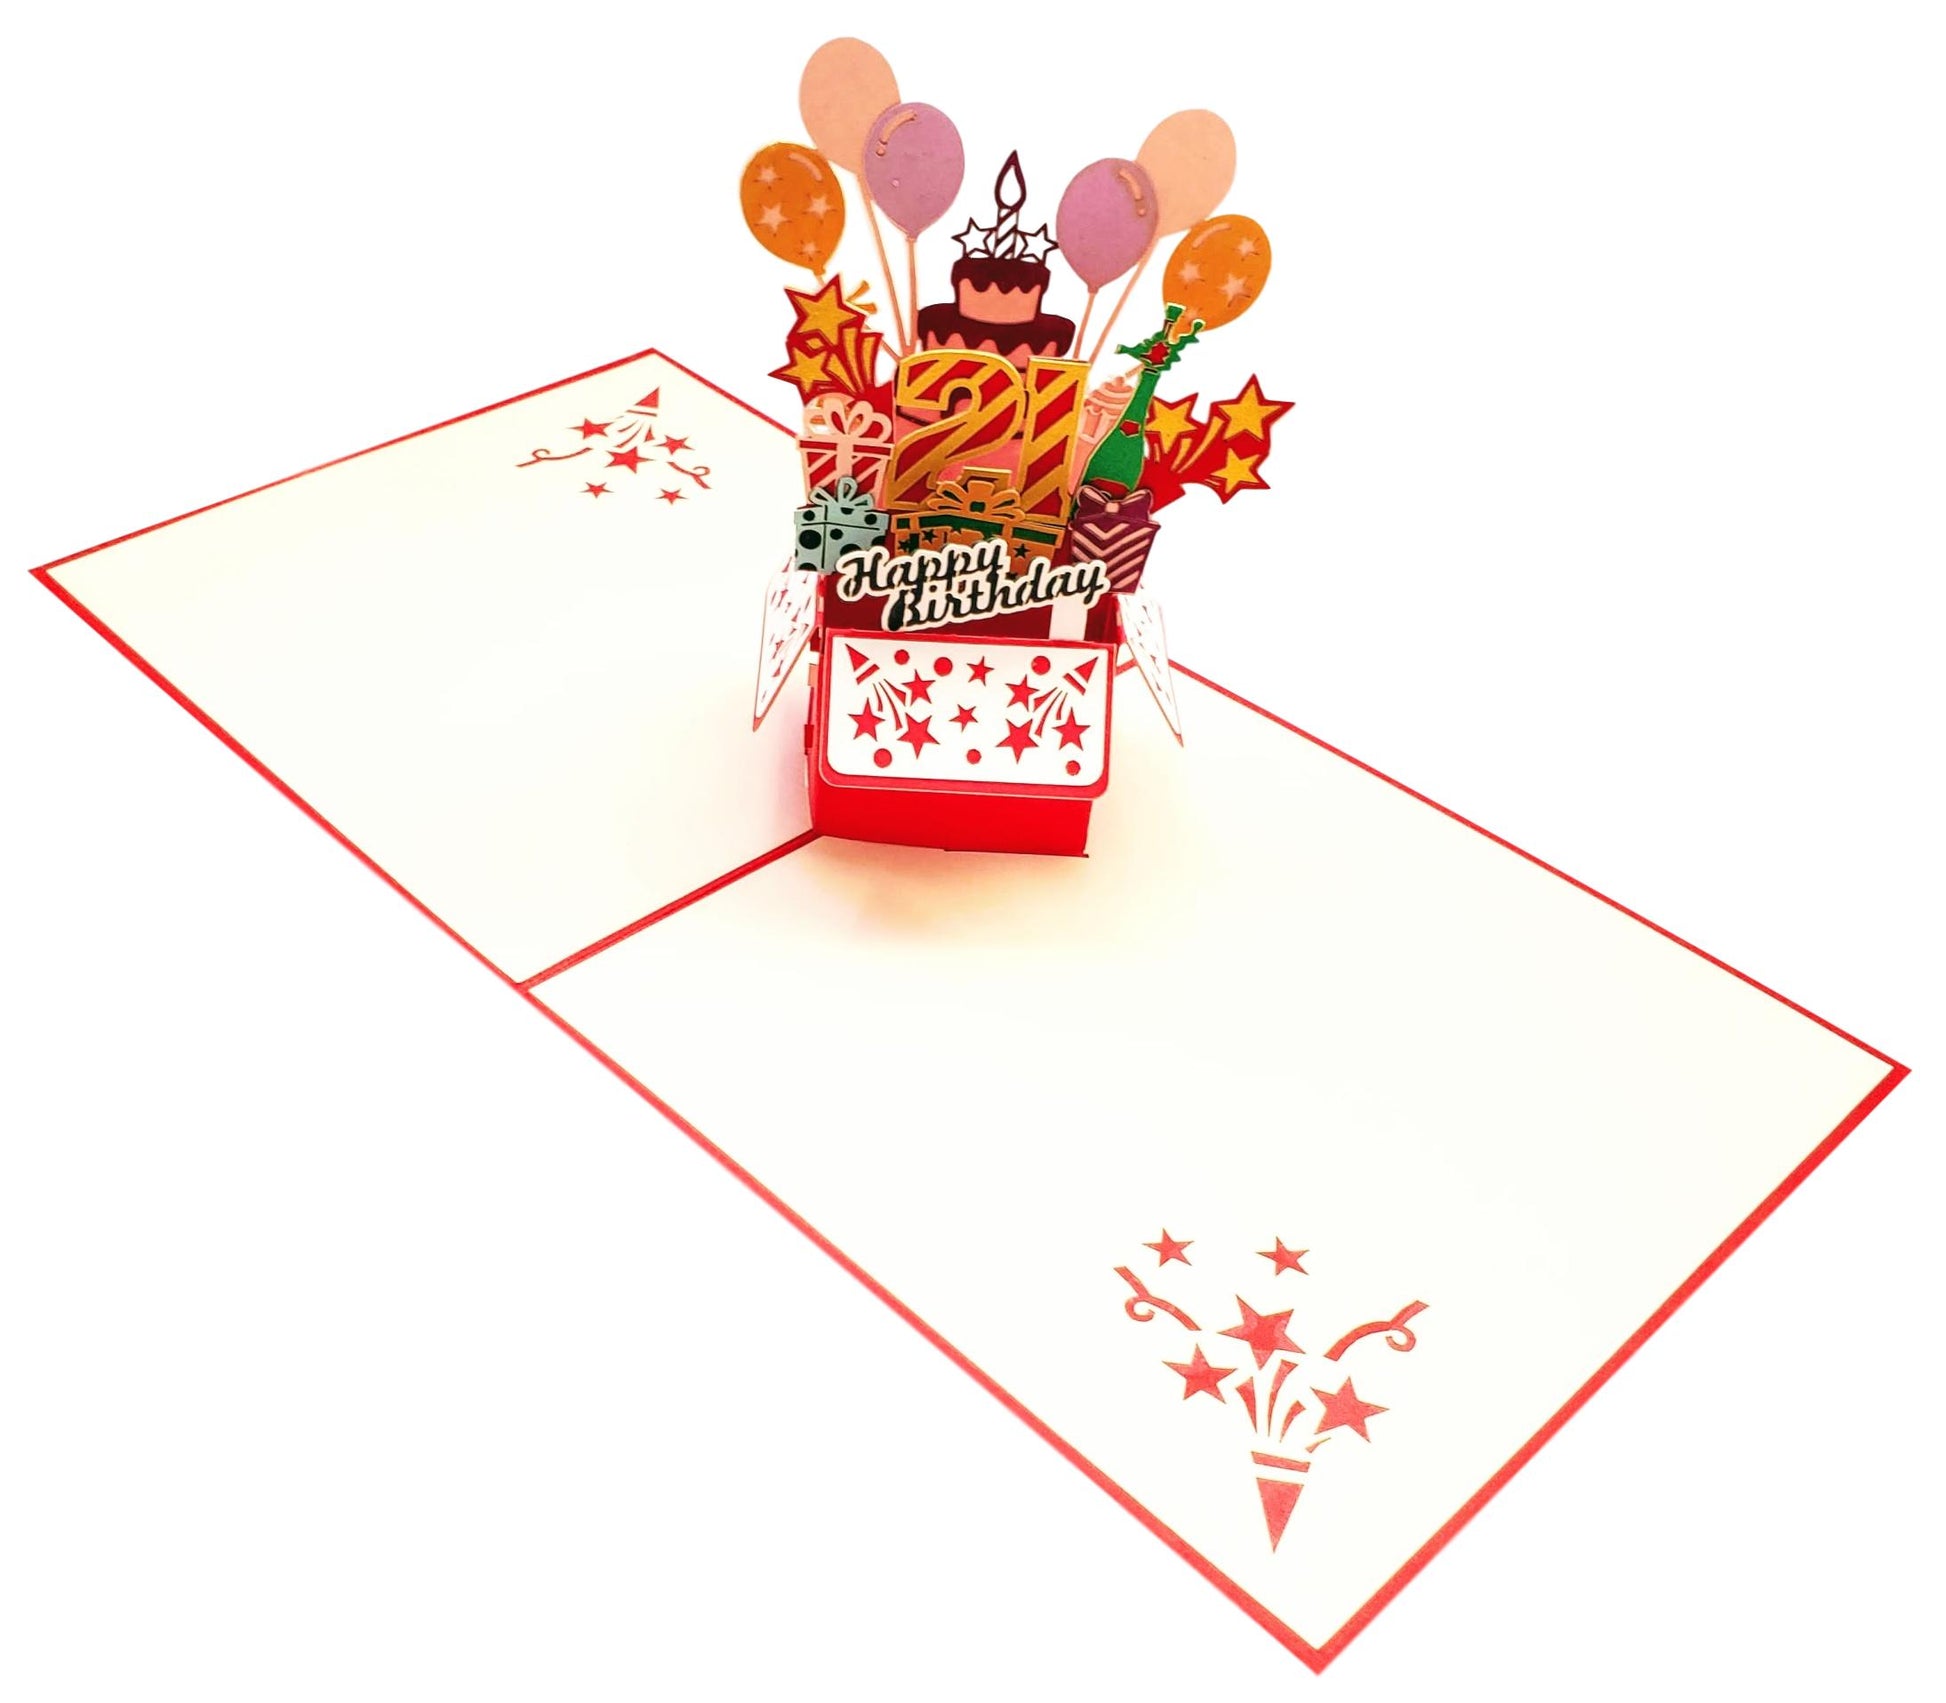 21st Red Party Box 3D Pop Up Greeting Card - Awesome - best wishes - Birthday - Brighten Someone’s D - iGifts And Cards